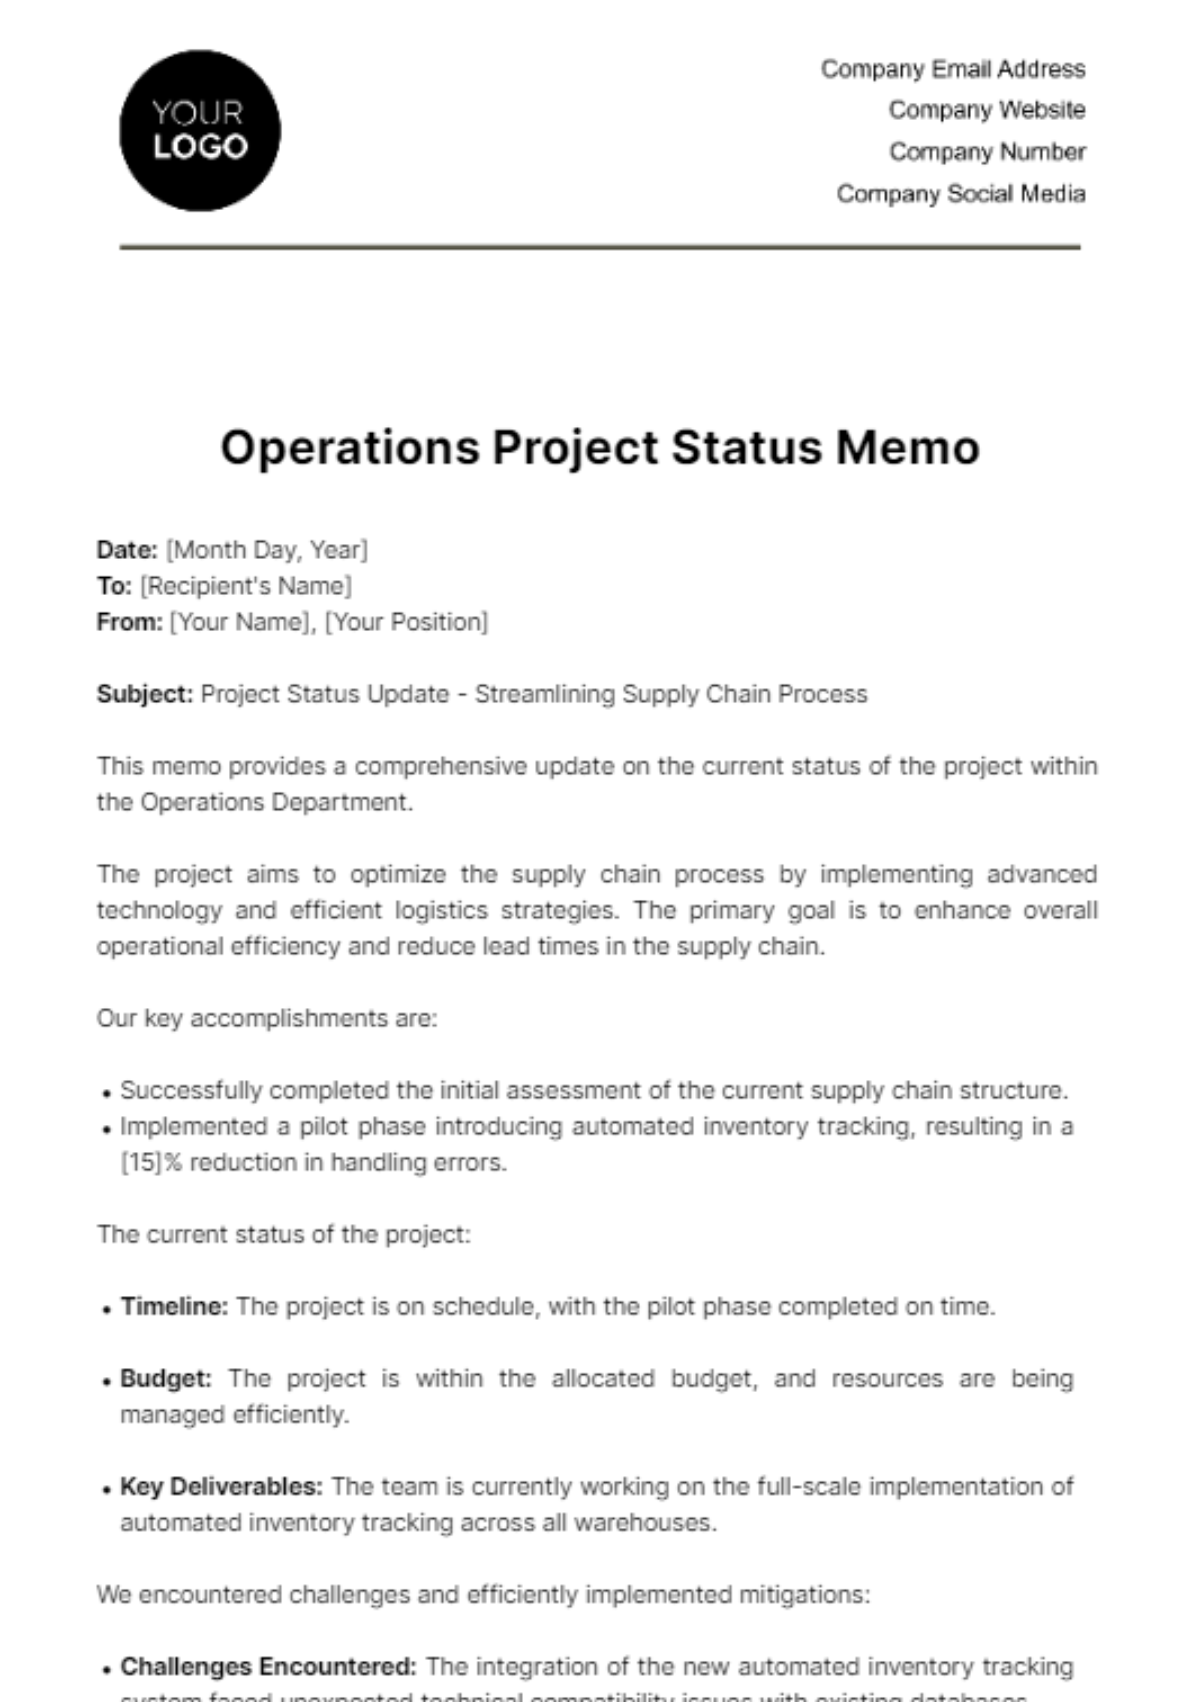 Free Operations Project Status Memo Template